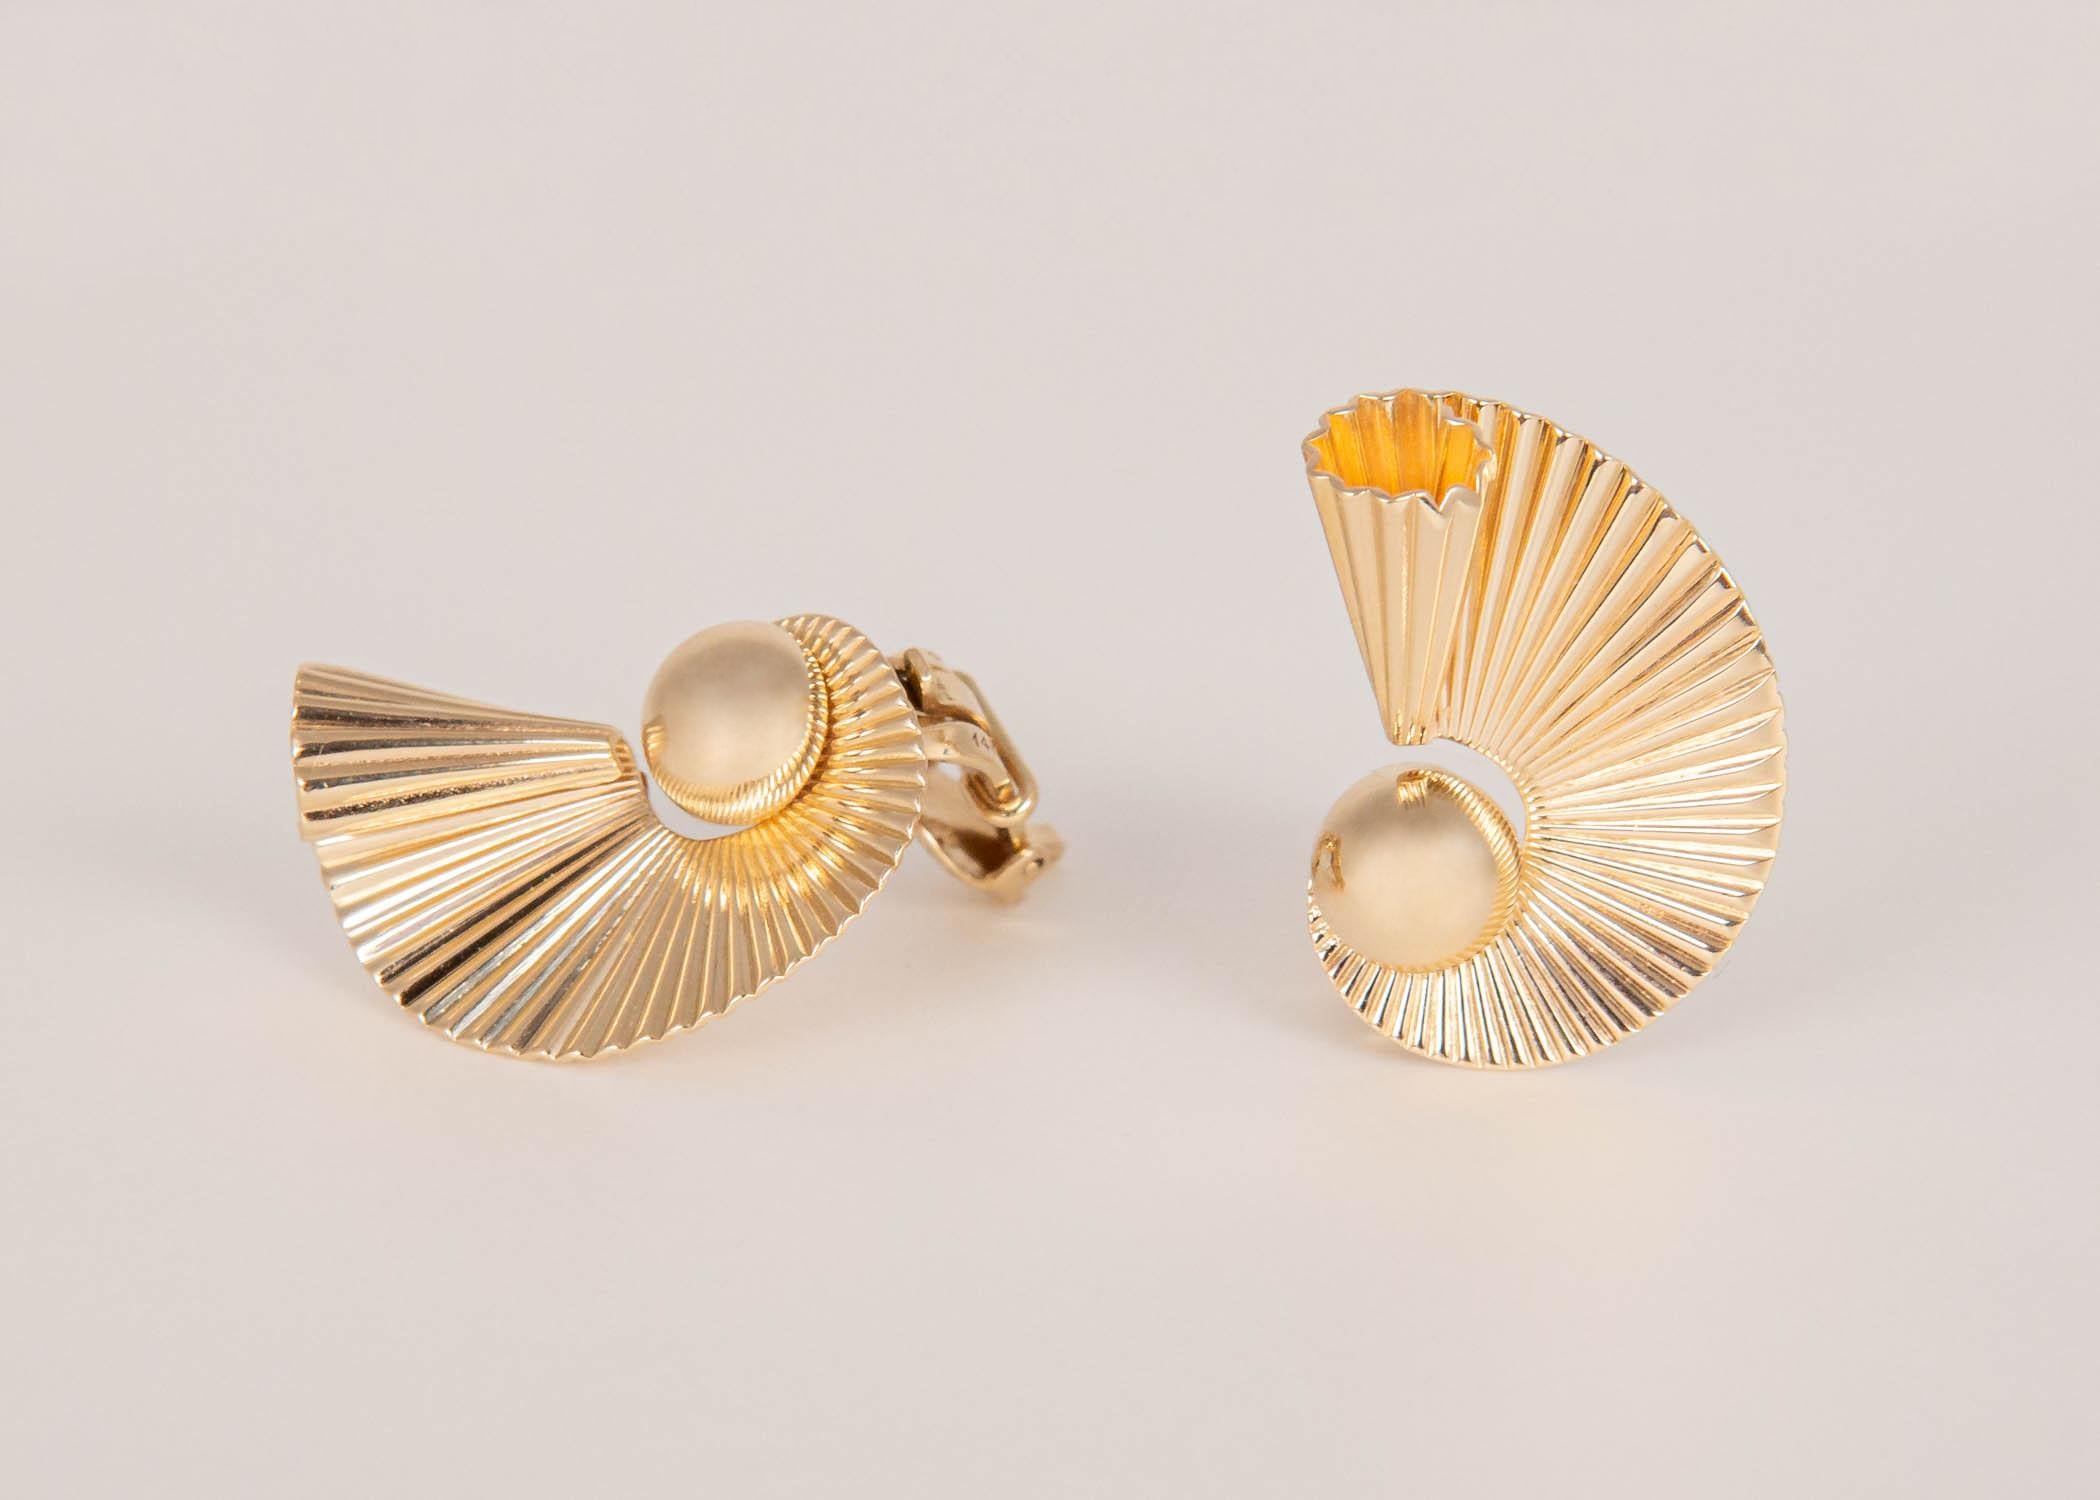 This pair of Mid-century earrings is elegant and a wonderful flattering shape. 7/8's of an inch in length